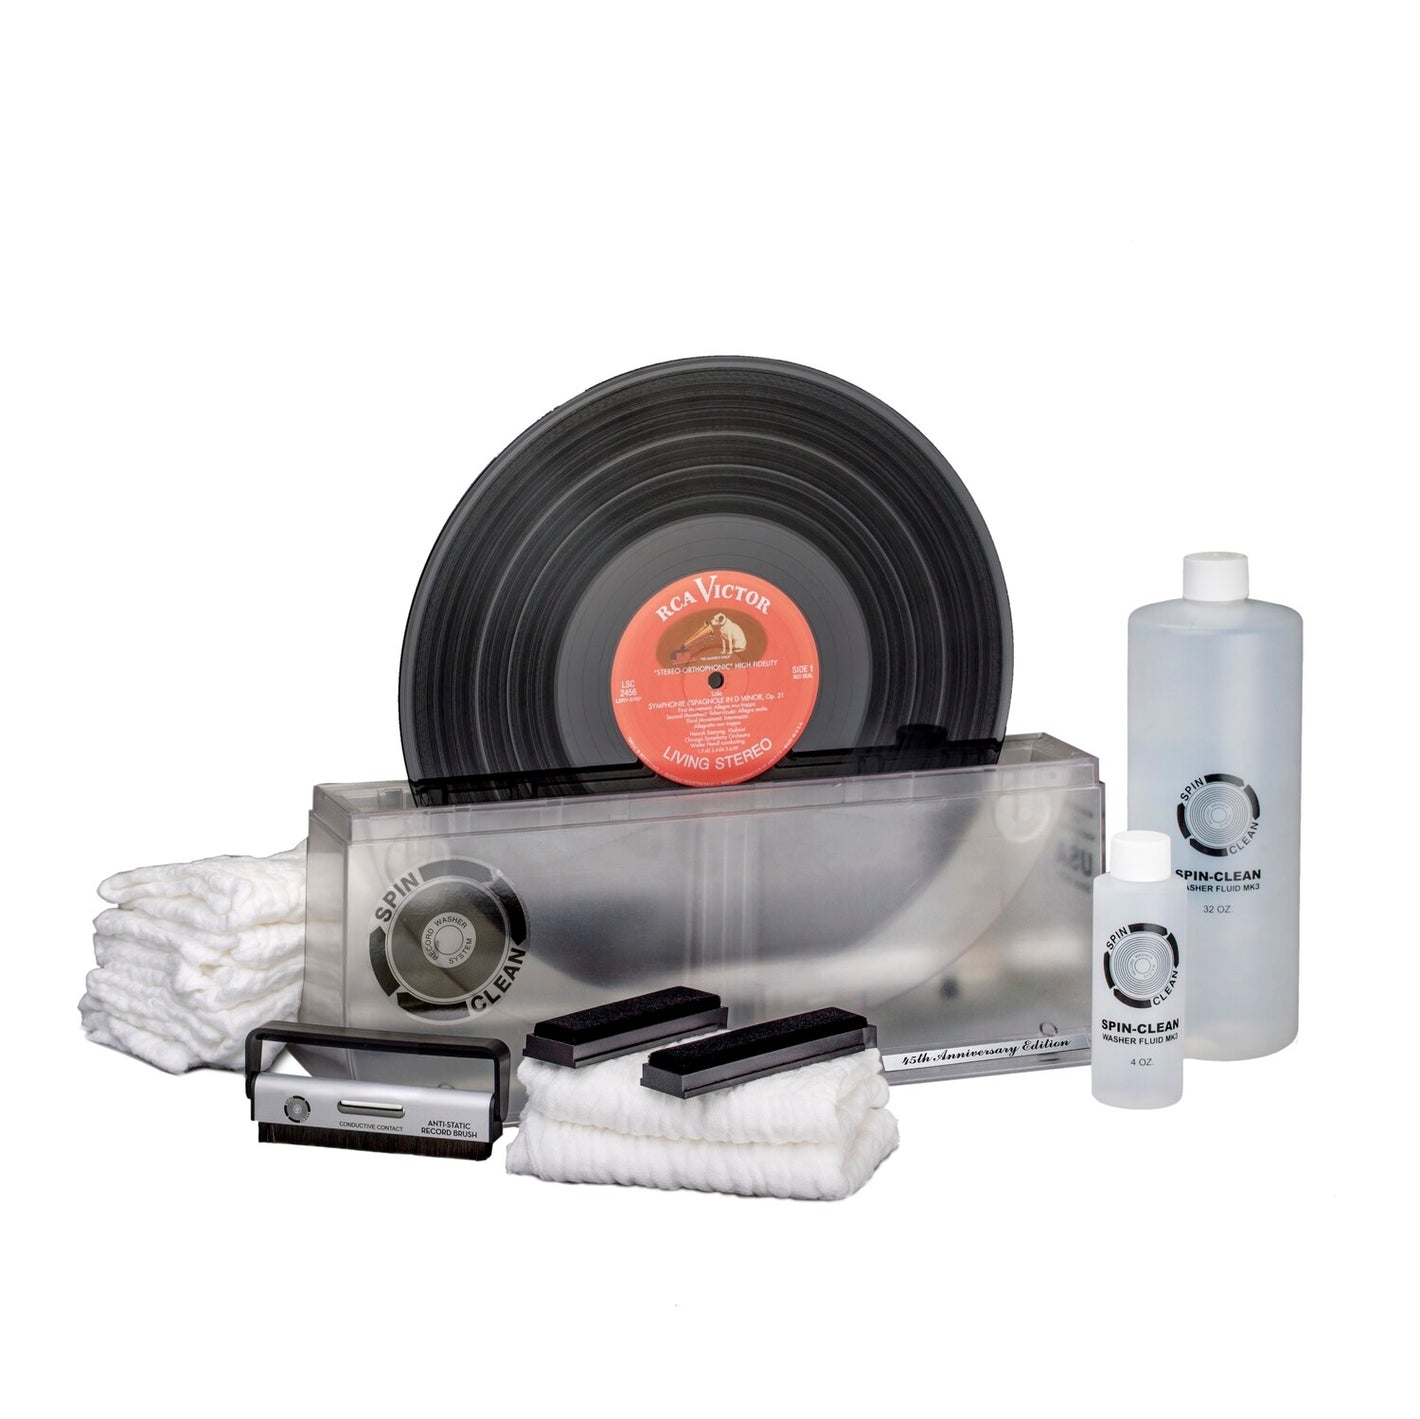 Spin-Clean Record Washer System 45th Anniversary, Limited Edition Deluxe, "Clear" Kit